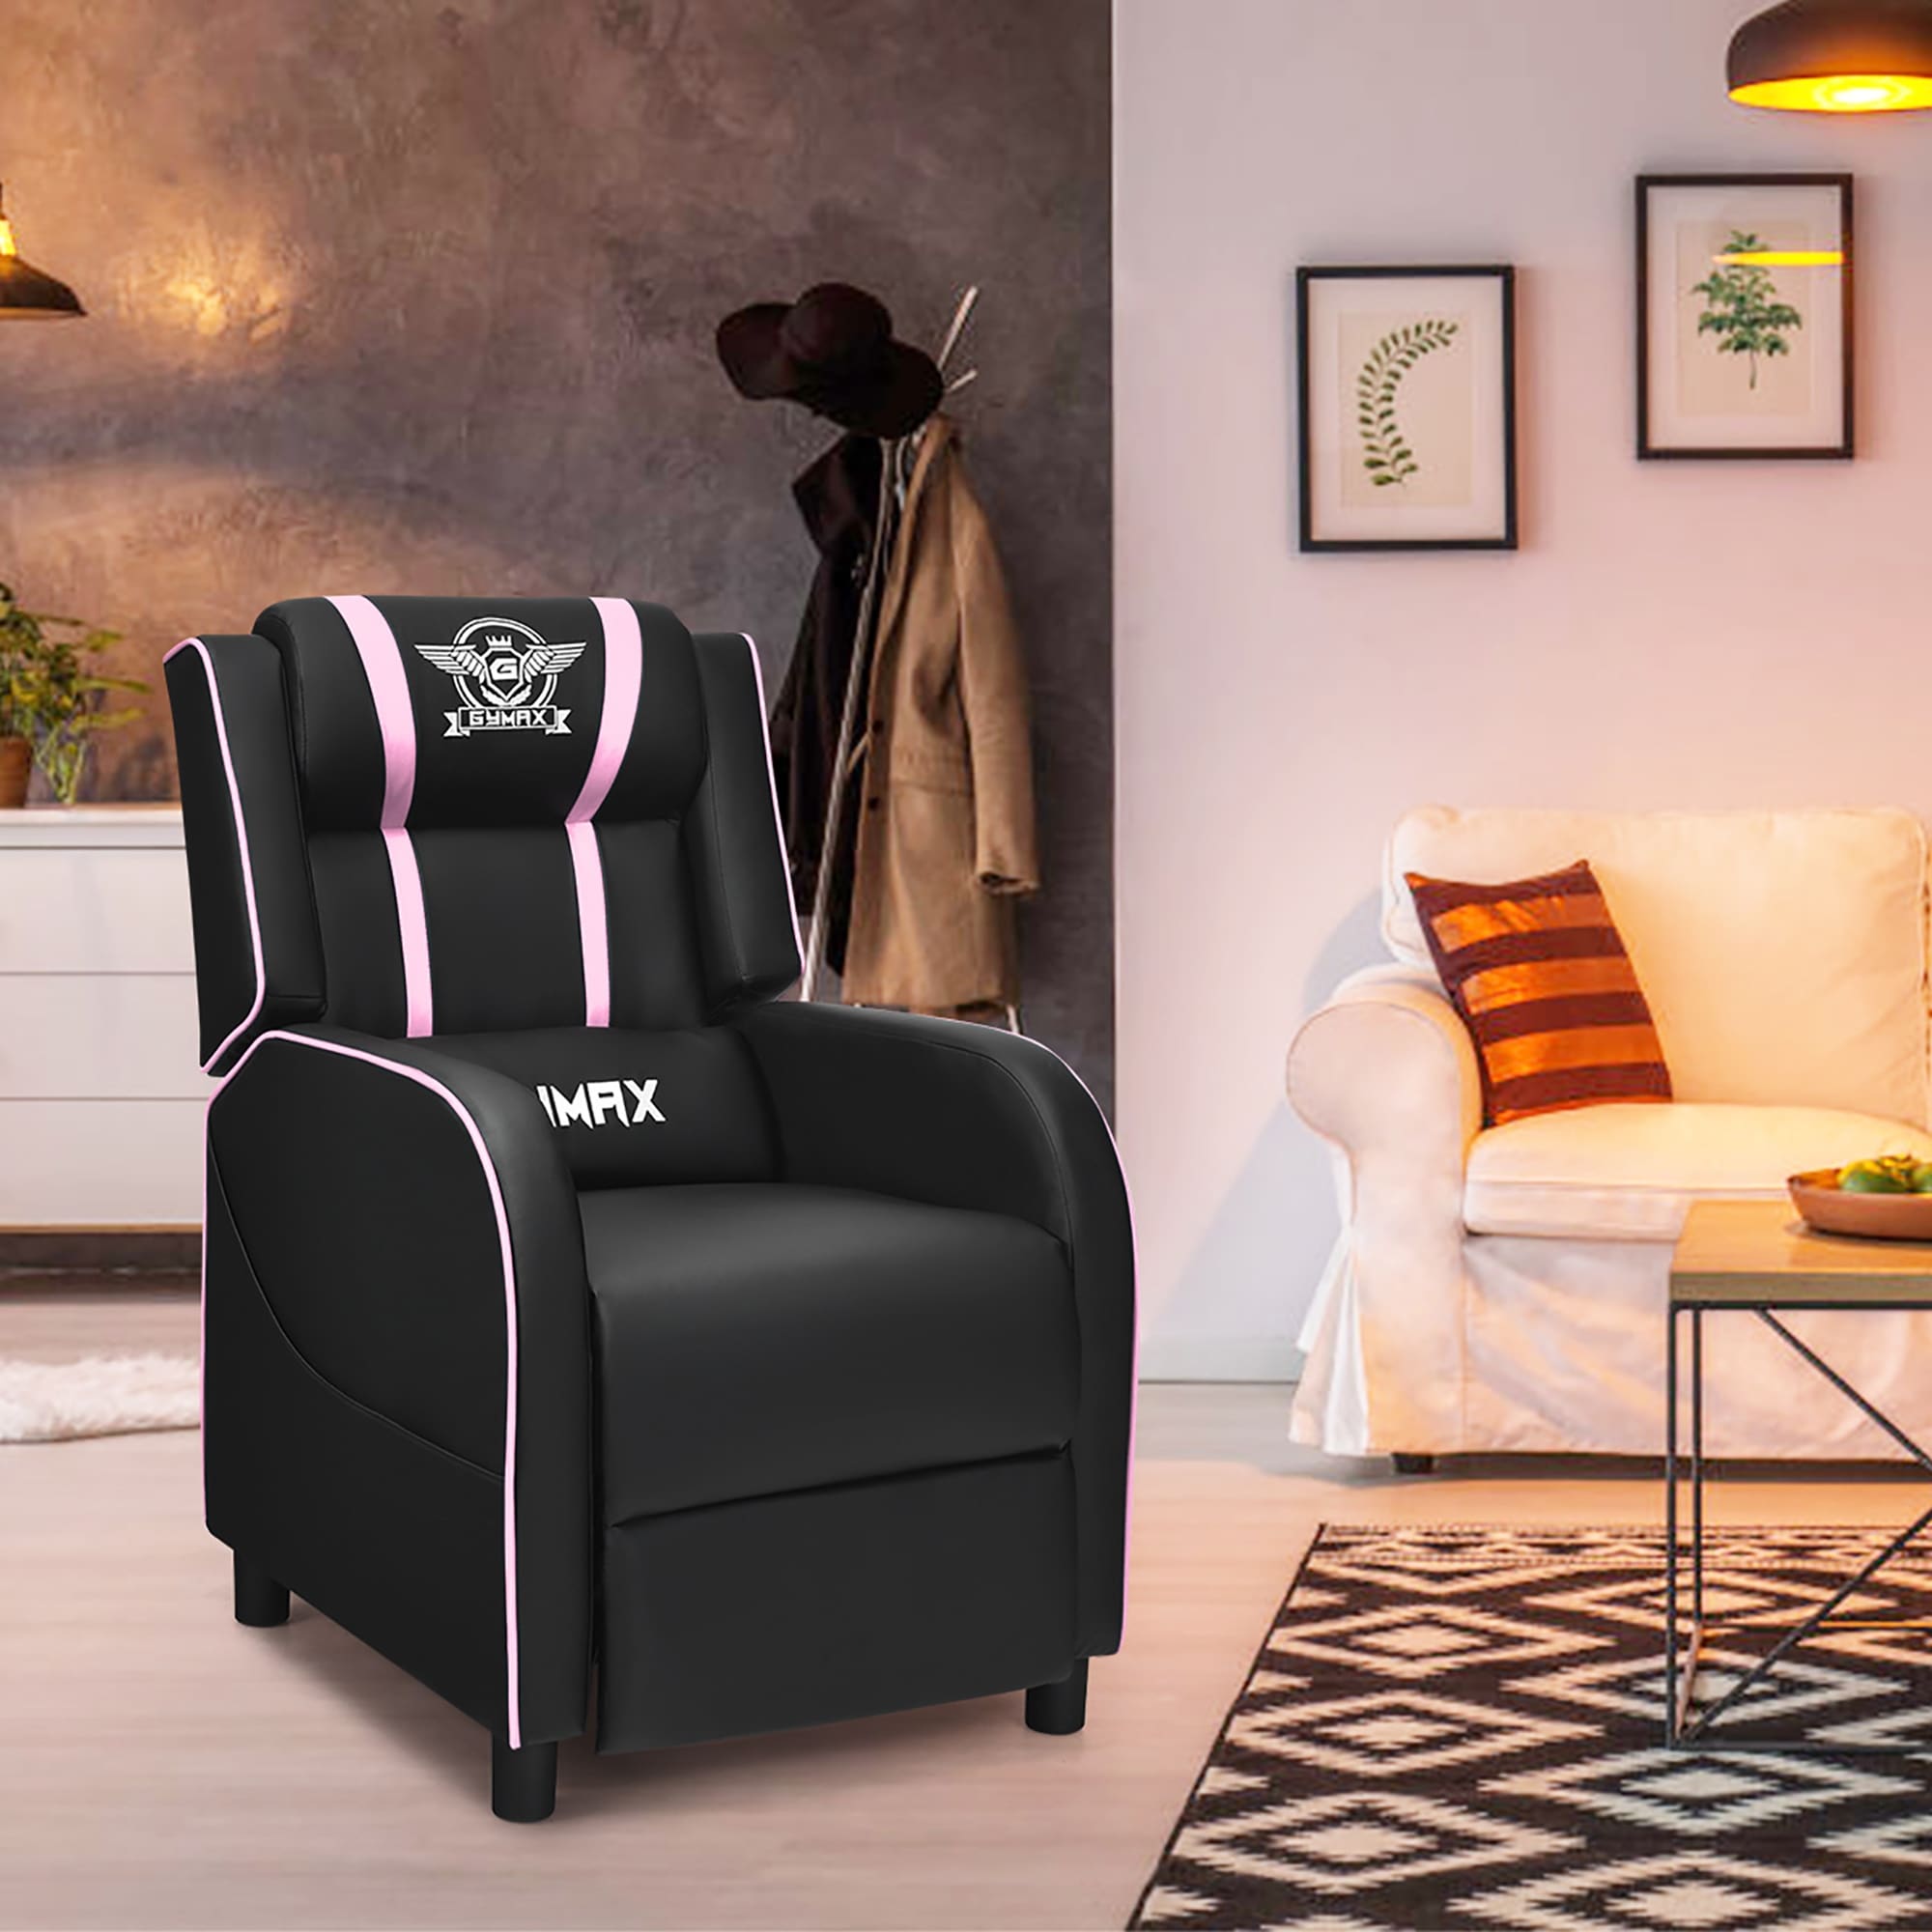 https://ak1.ostkcdn.com/images/products/is/images/direct/af460e46afc9a75d898a9051a44efe0d2c43daa6/Massage-Gaming-Recliner-Chair-Racing-Style-Single-Lounge-Sofa.jpg